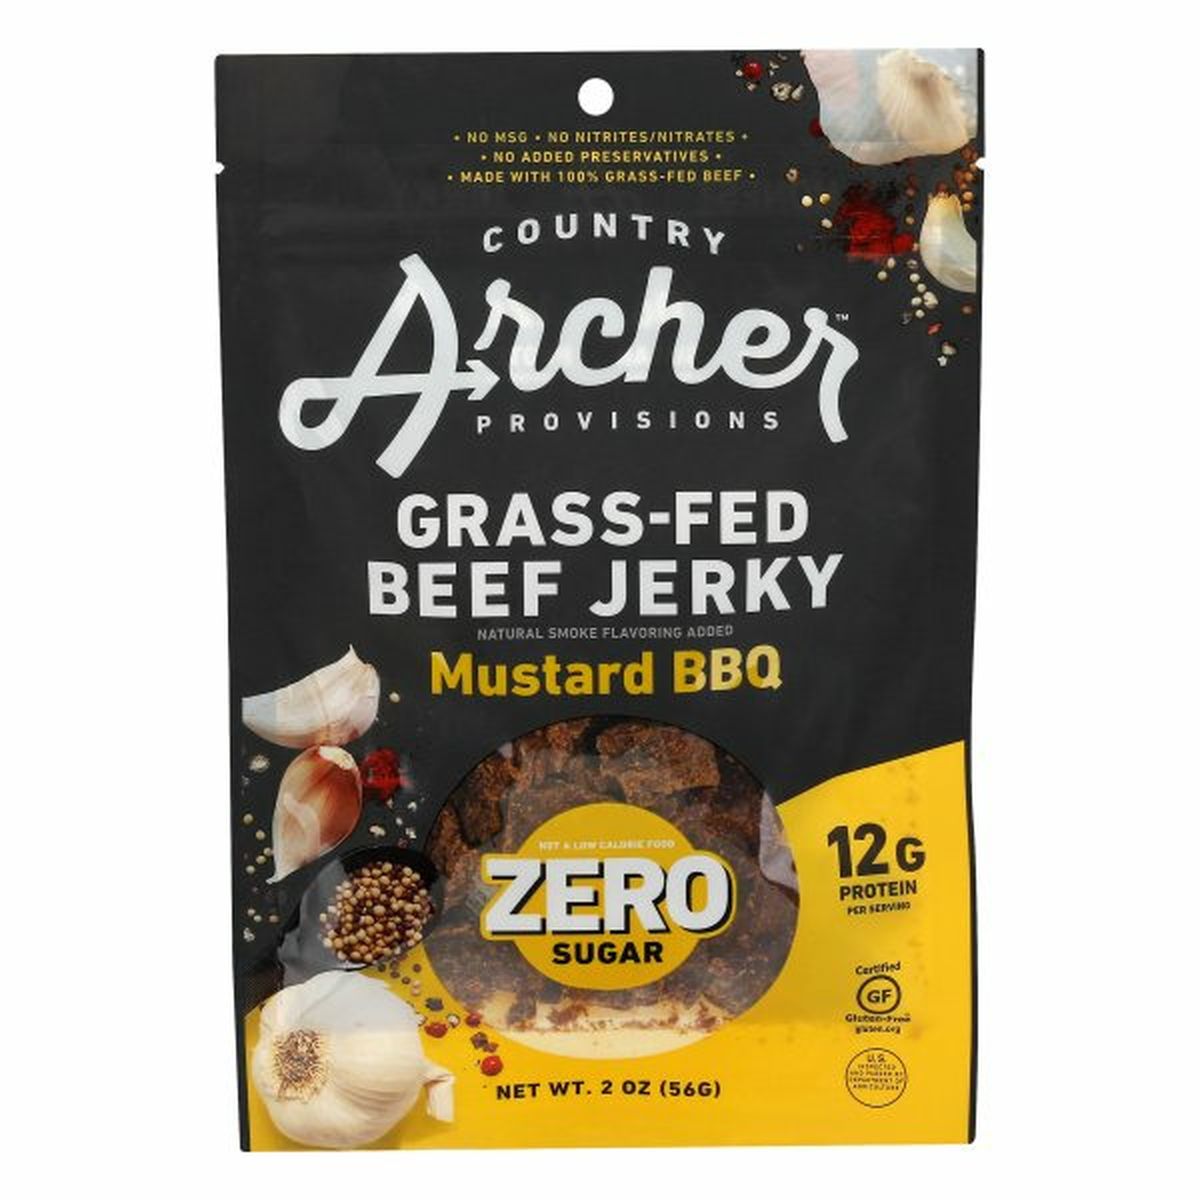 Calories in Country Archer Provisions Beef Jerky, Zero Sugar, Mustard BBQ, Grass-Fed